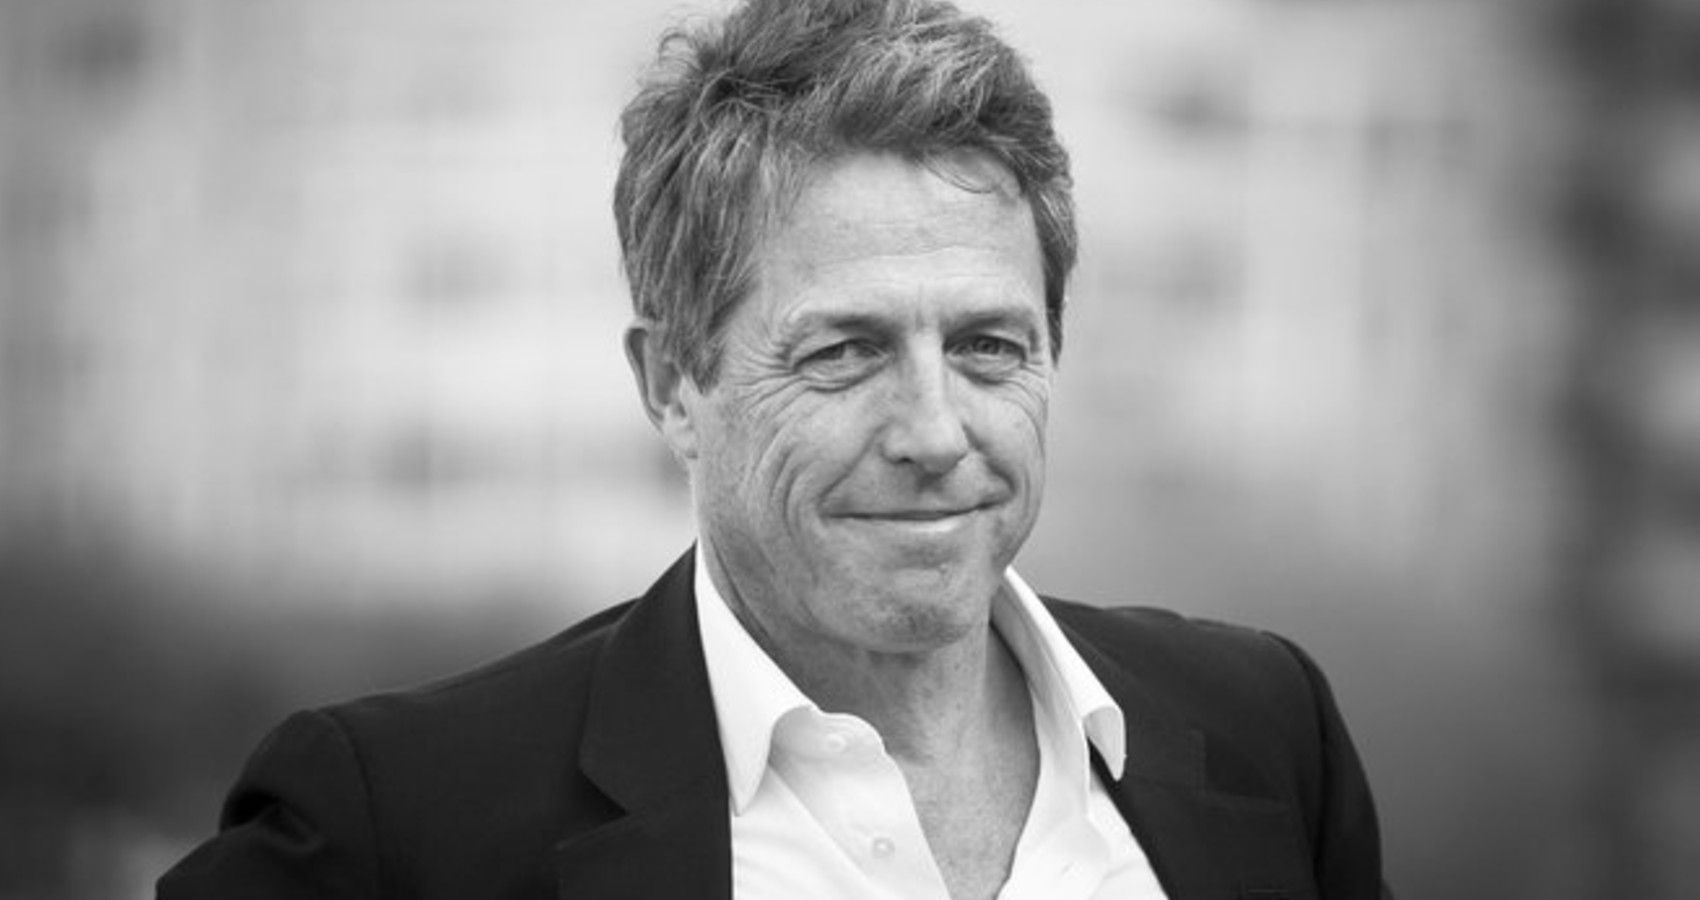 A picture of Hugh Grant in black and white